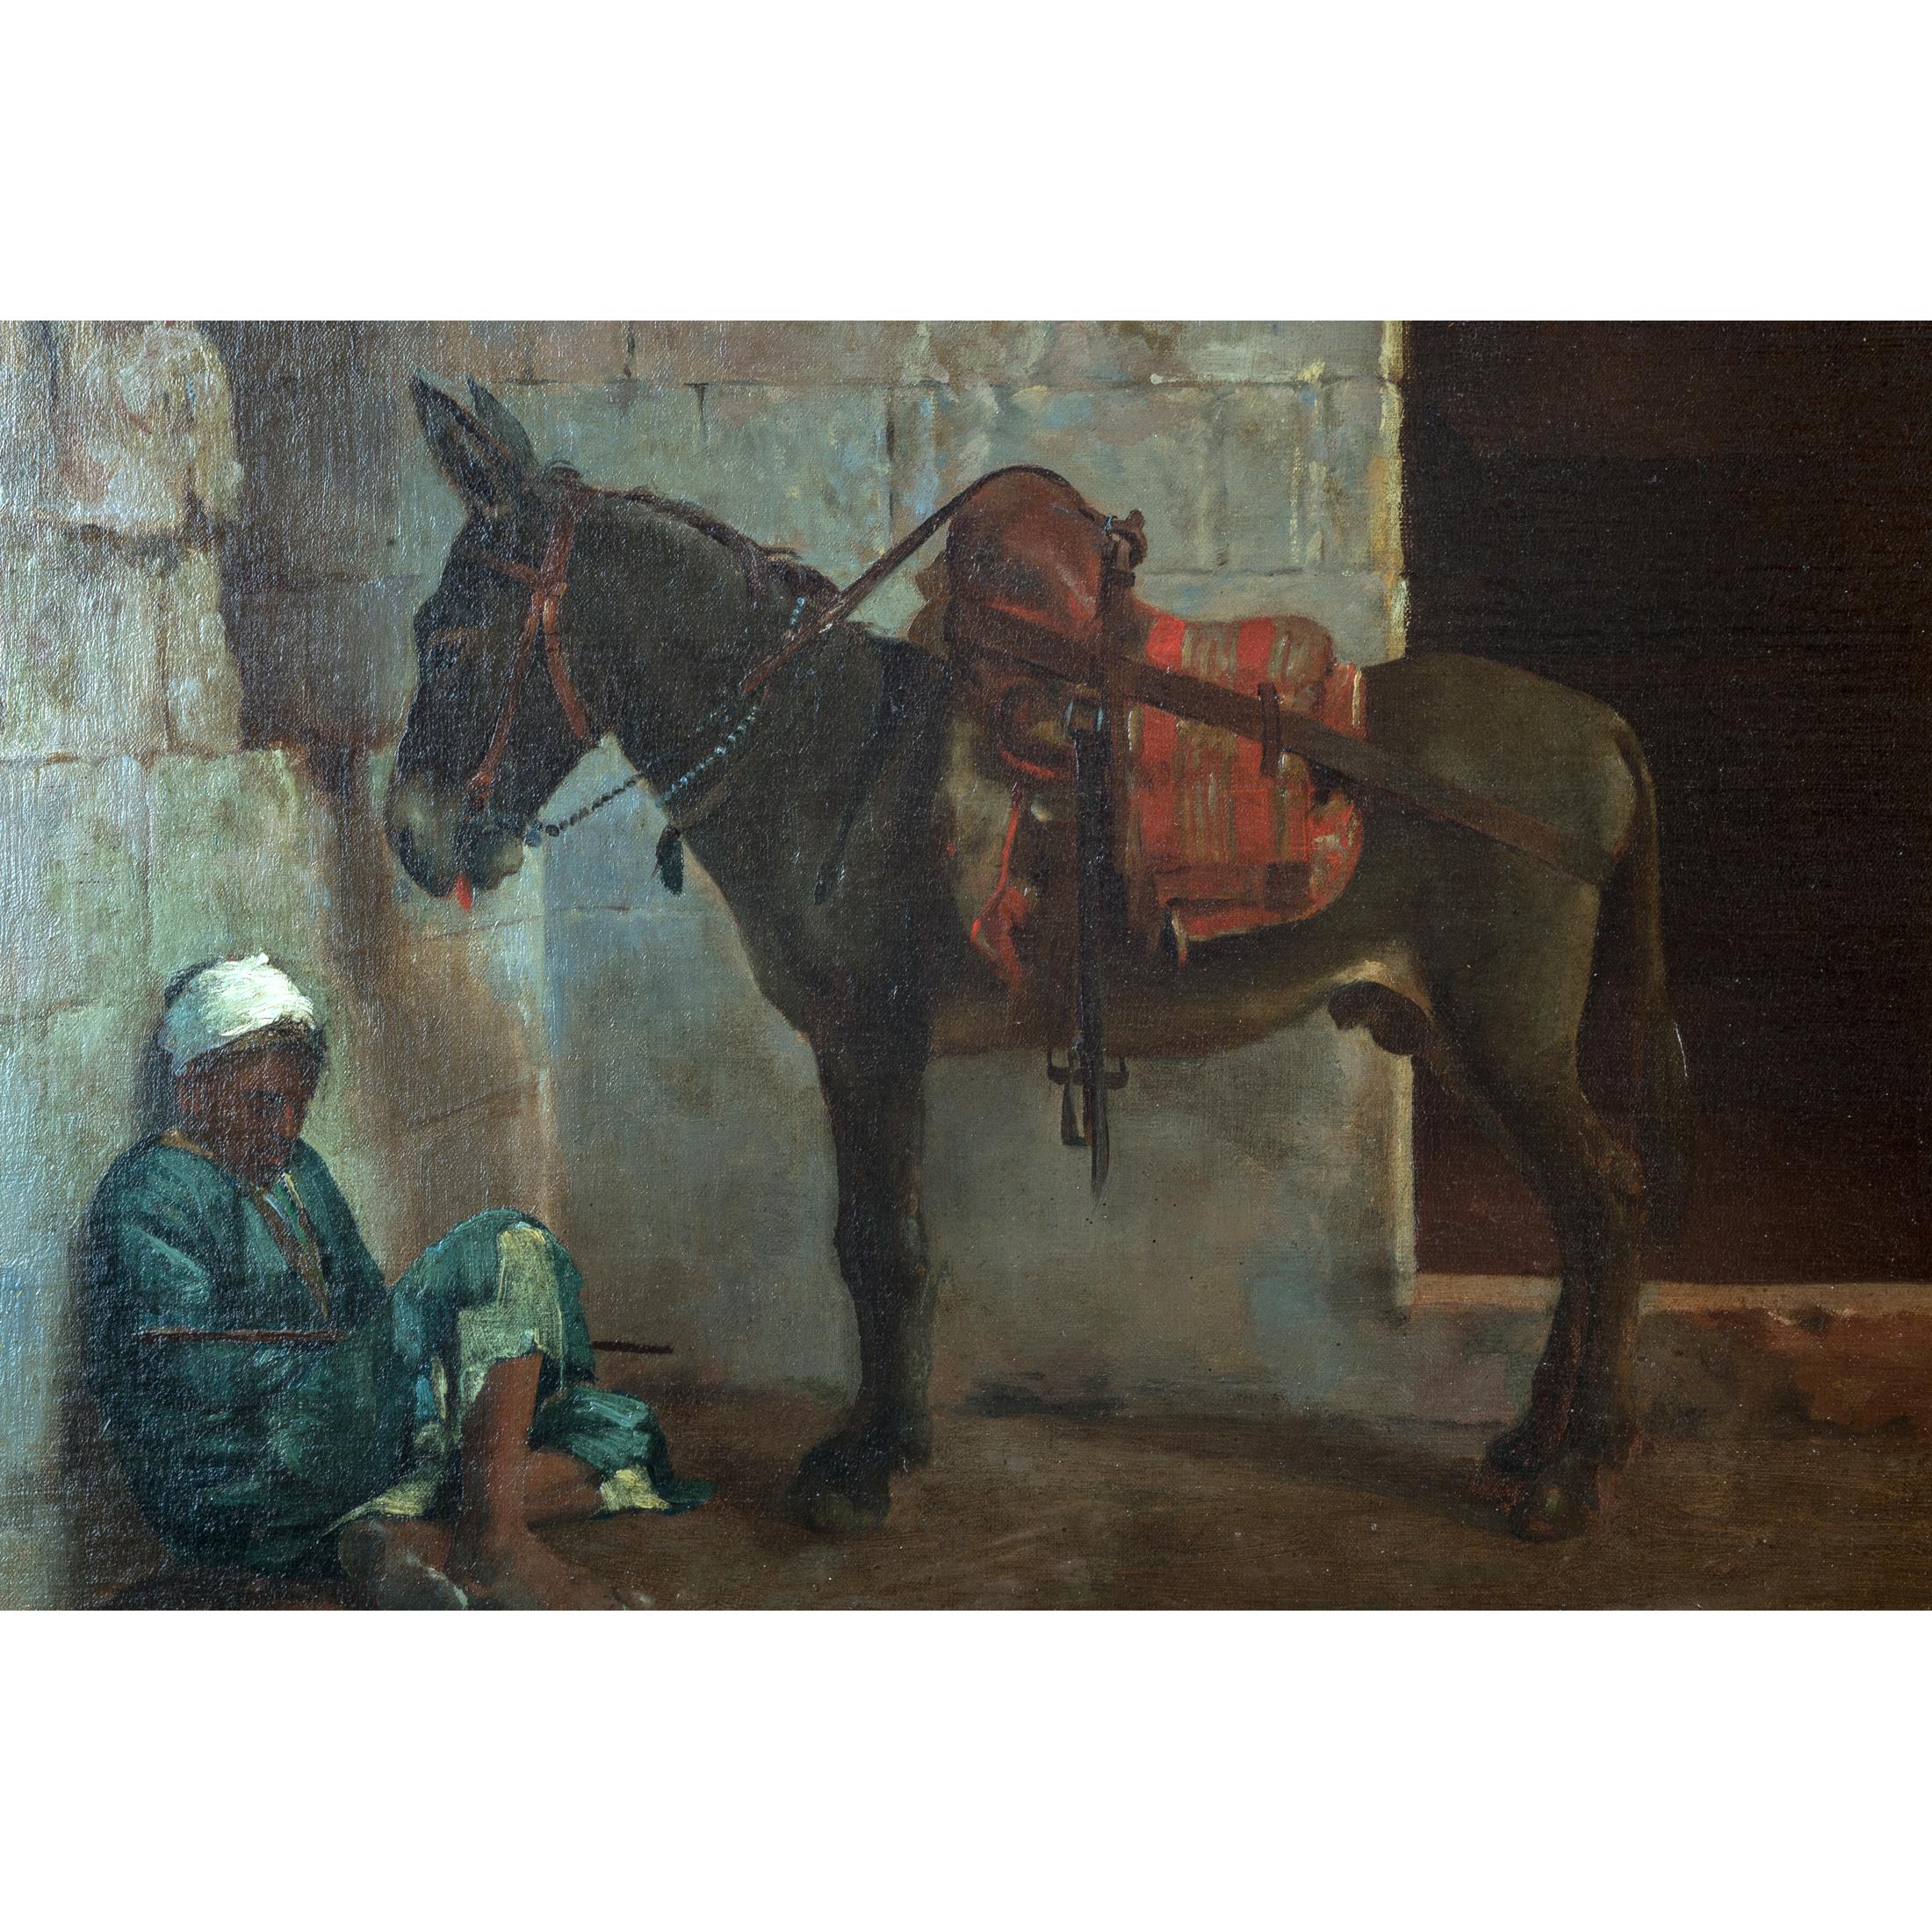 Hand-Painted Fine Orientalist Painting of a Young Boy with Donkey by Nicola Forcella